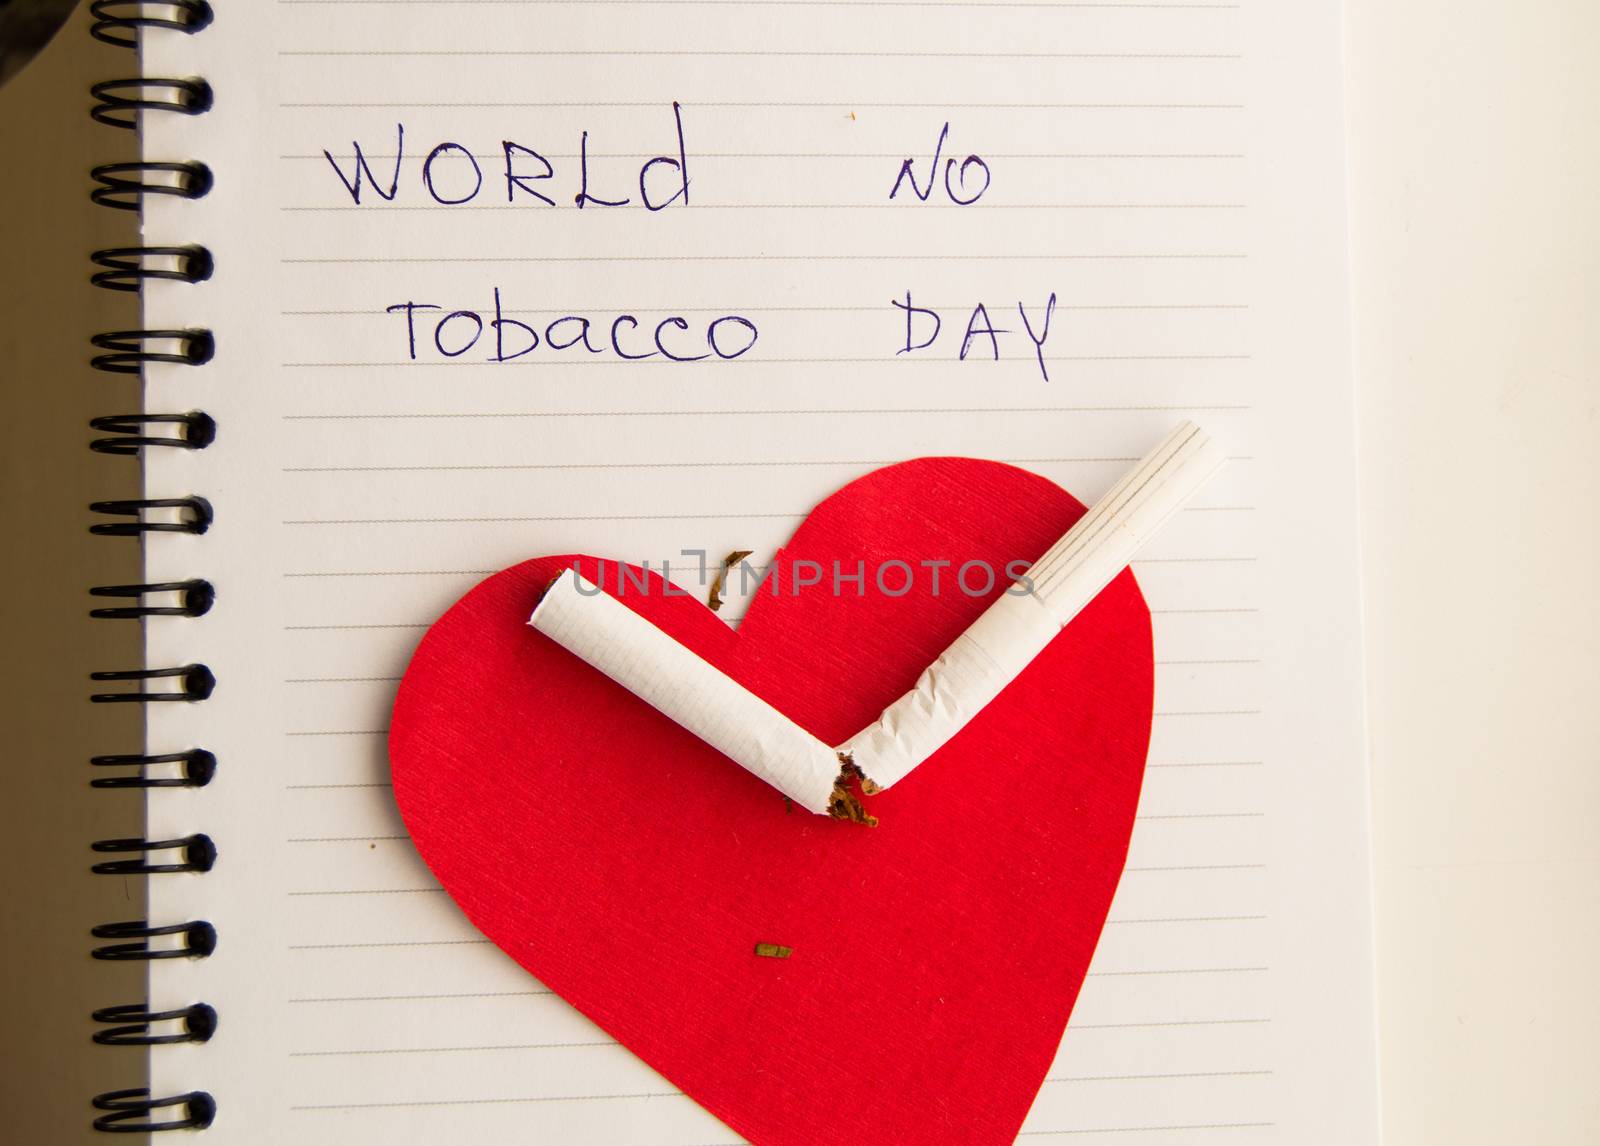 World day Smoking cessation, quit Smoking, anti-Smoking concept, broken cigarette on red heart and words world no tobacco day by claire_lucia